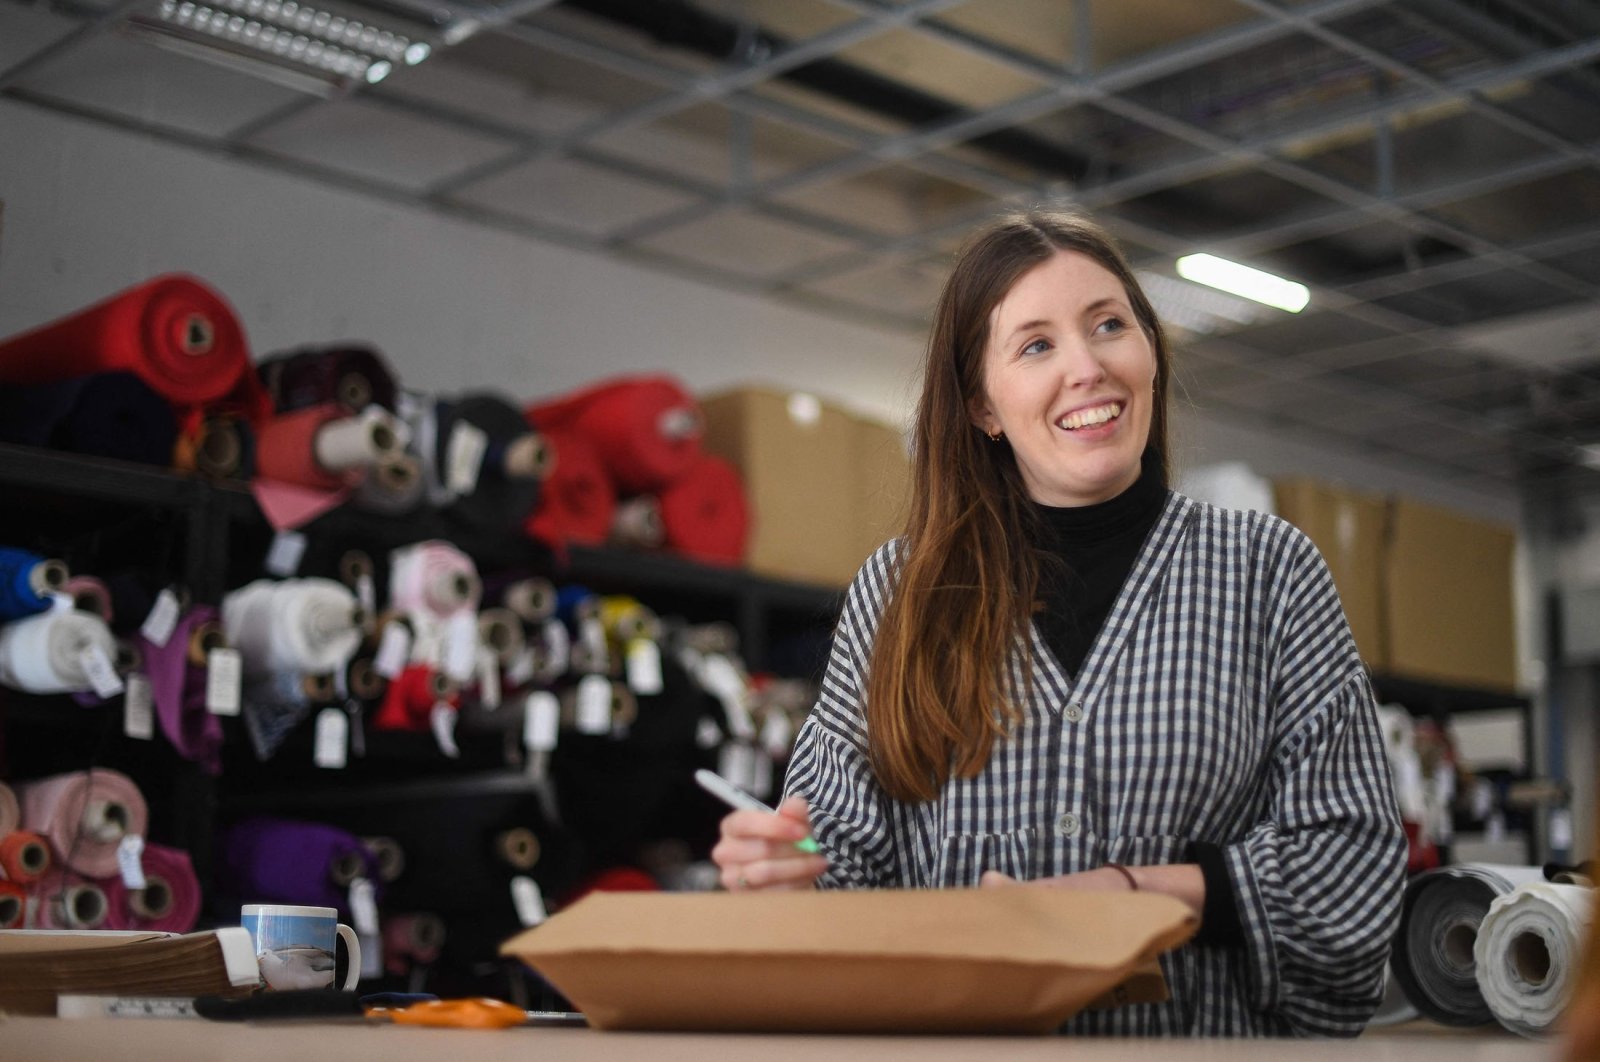 Rosie Scott, co-founder of The New Craft House, a sewing workshop studio and designer deadstock fabric shop, in Hackney, East London, U.K., Feb. 11, 2022. (AFP Photo)